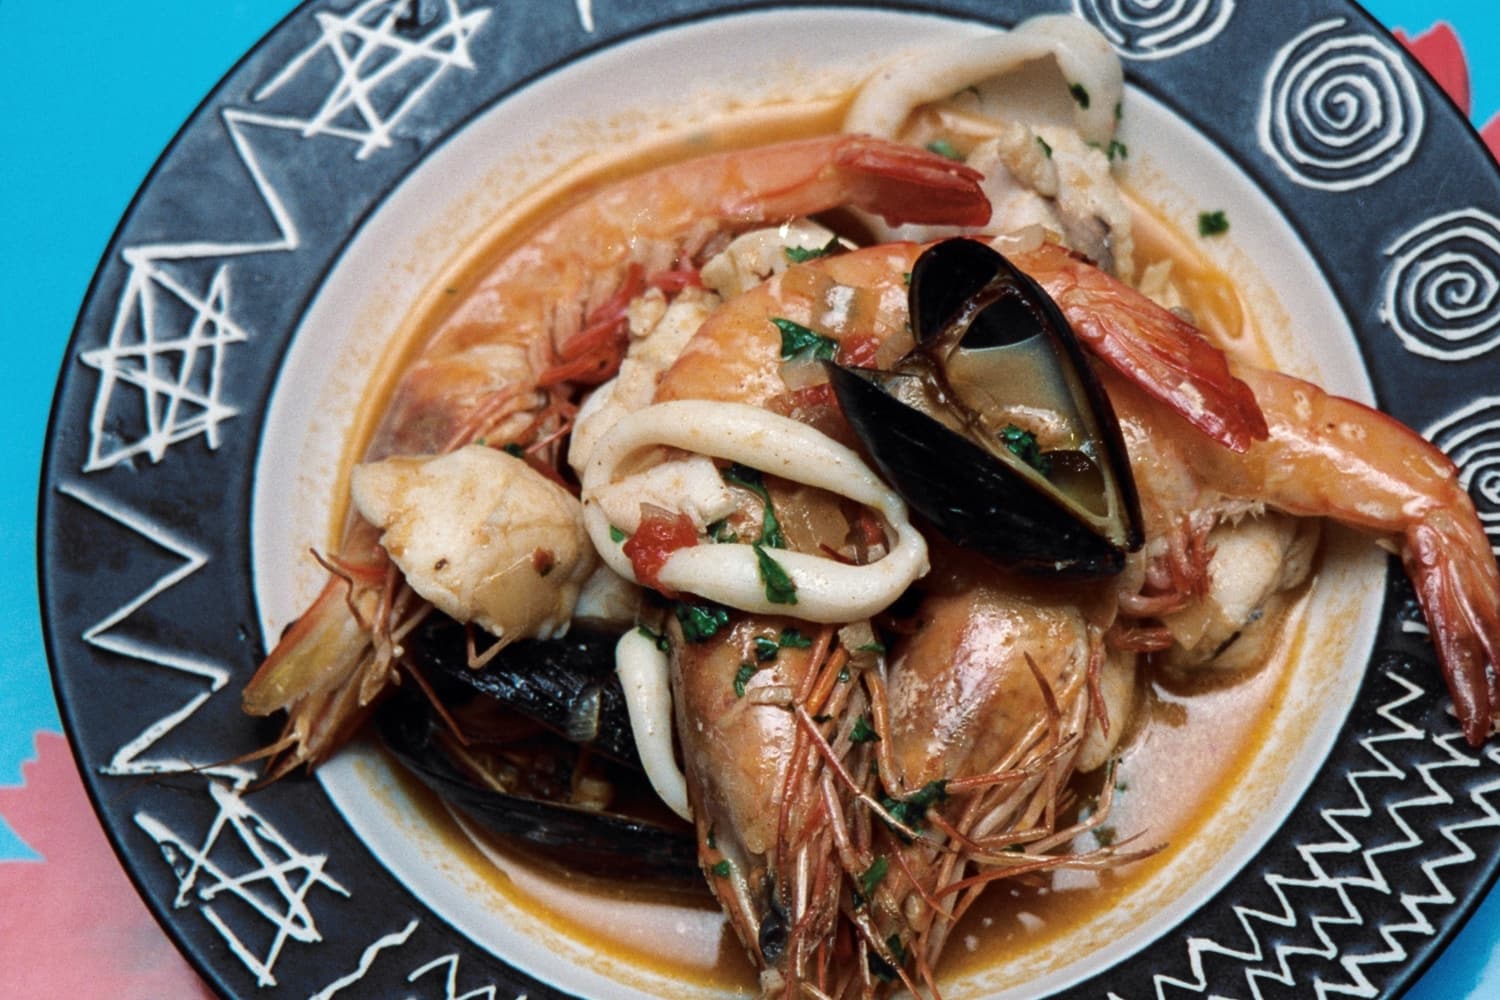 Seafood Stew served and ready to eat